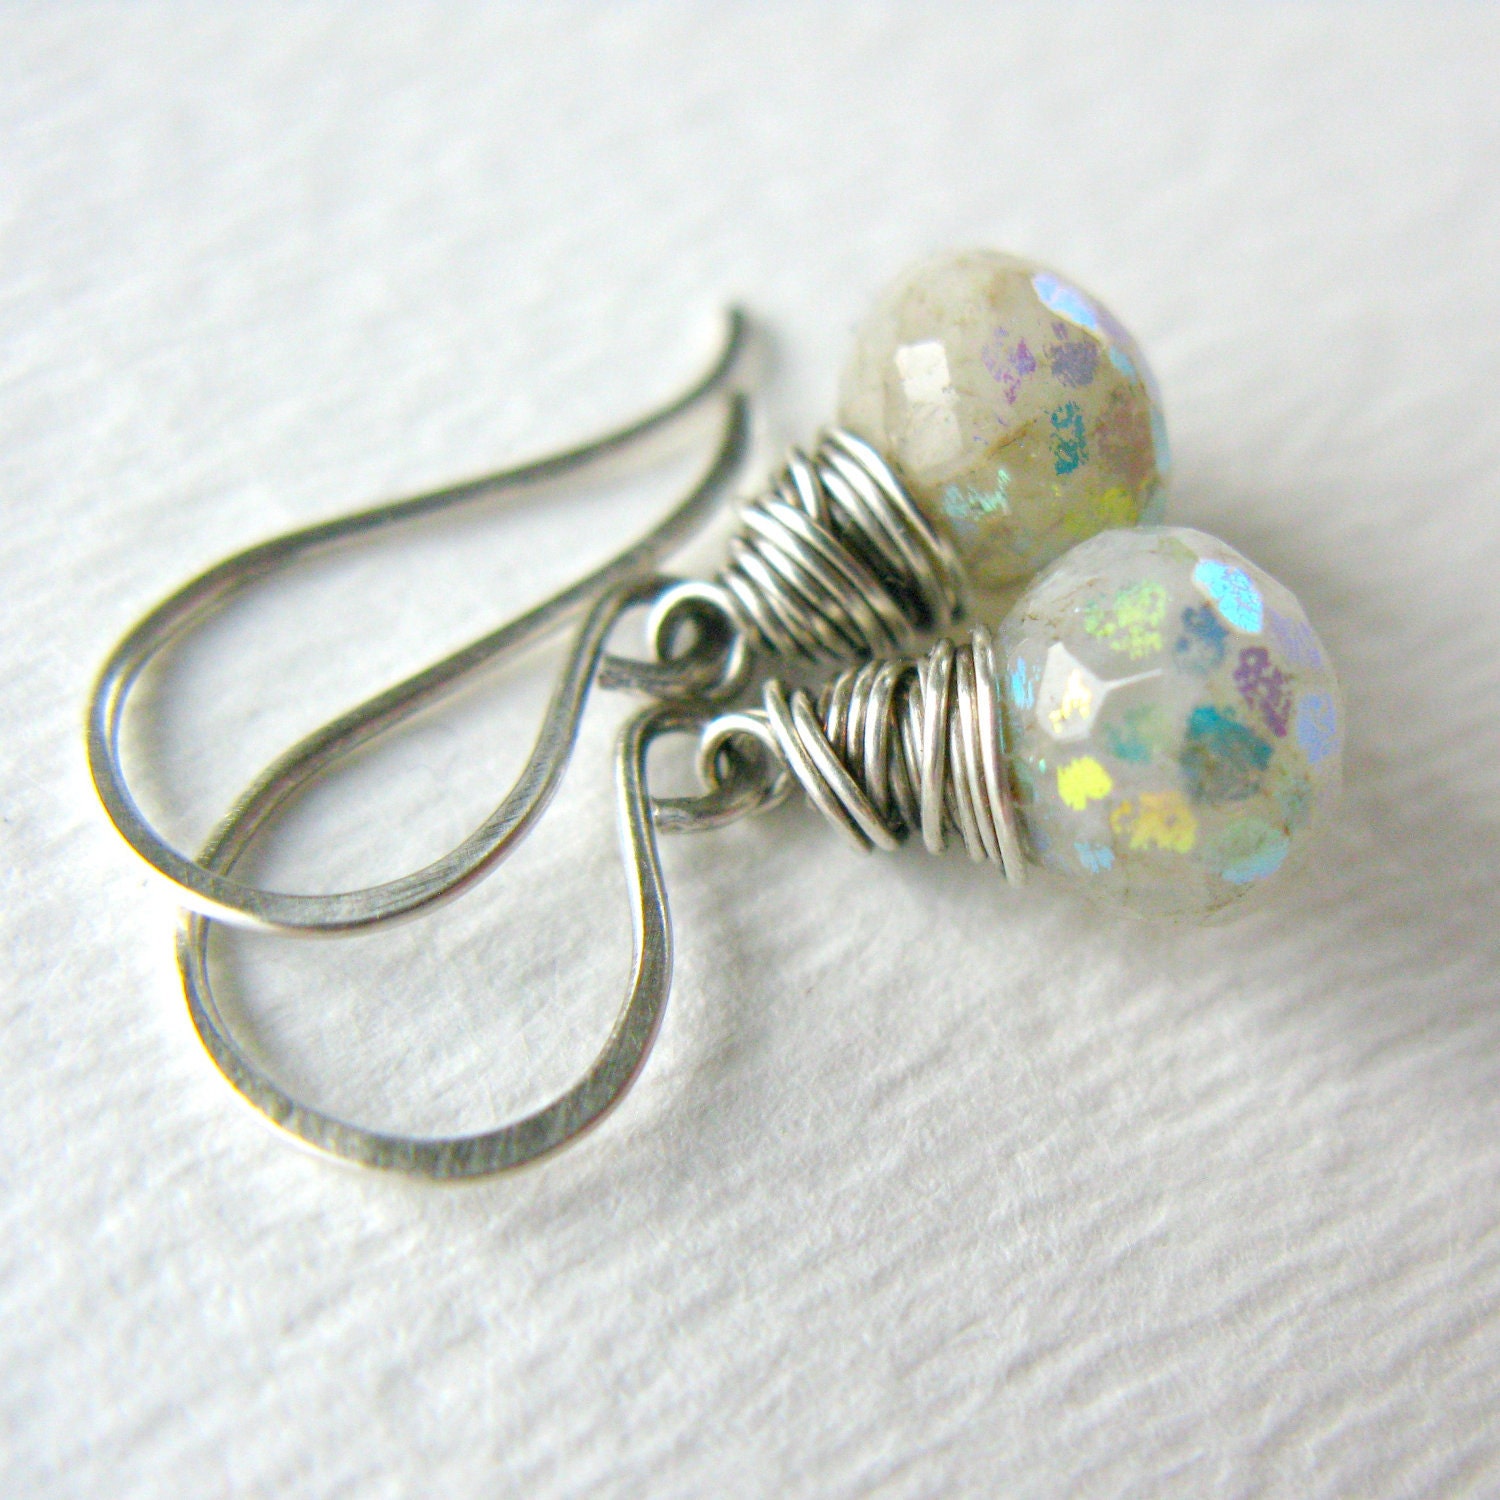 Aquamarine Silver Earrings AB Rainbow Oxidized Sterling Silver Wire Wrapped ..... Spring Showers ..... - SugarRococo